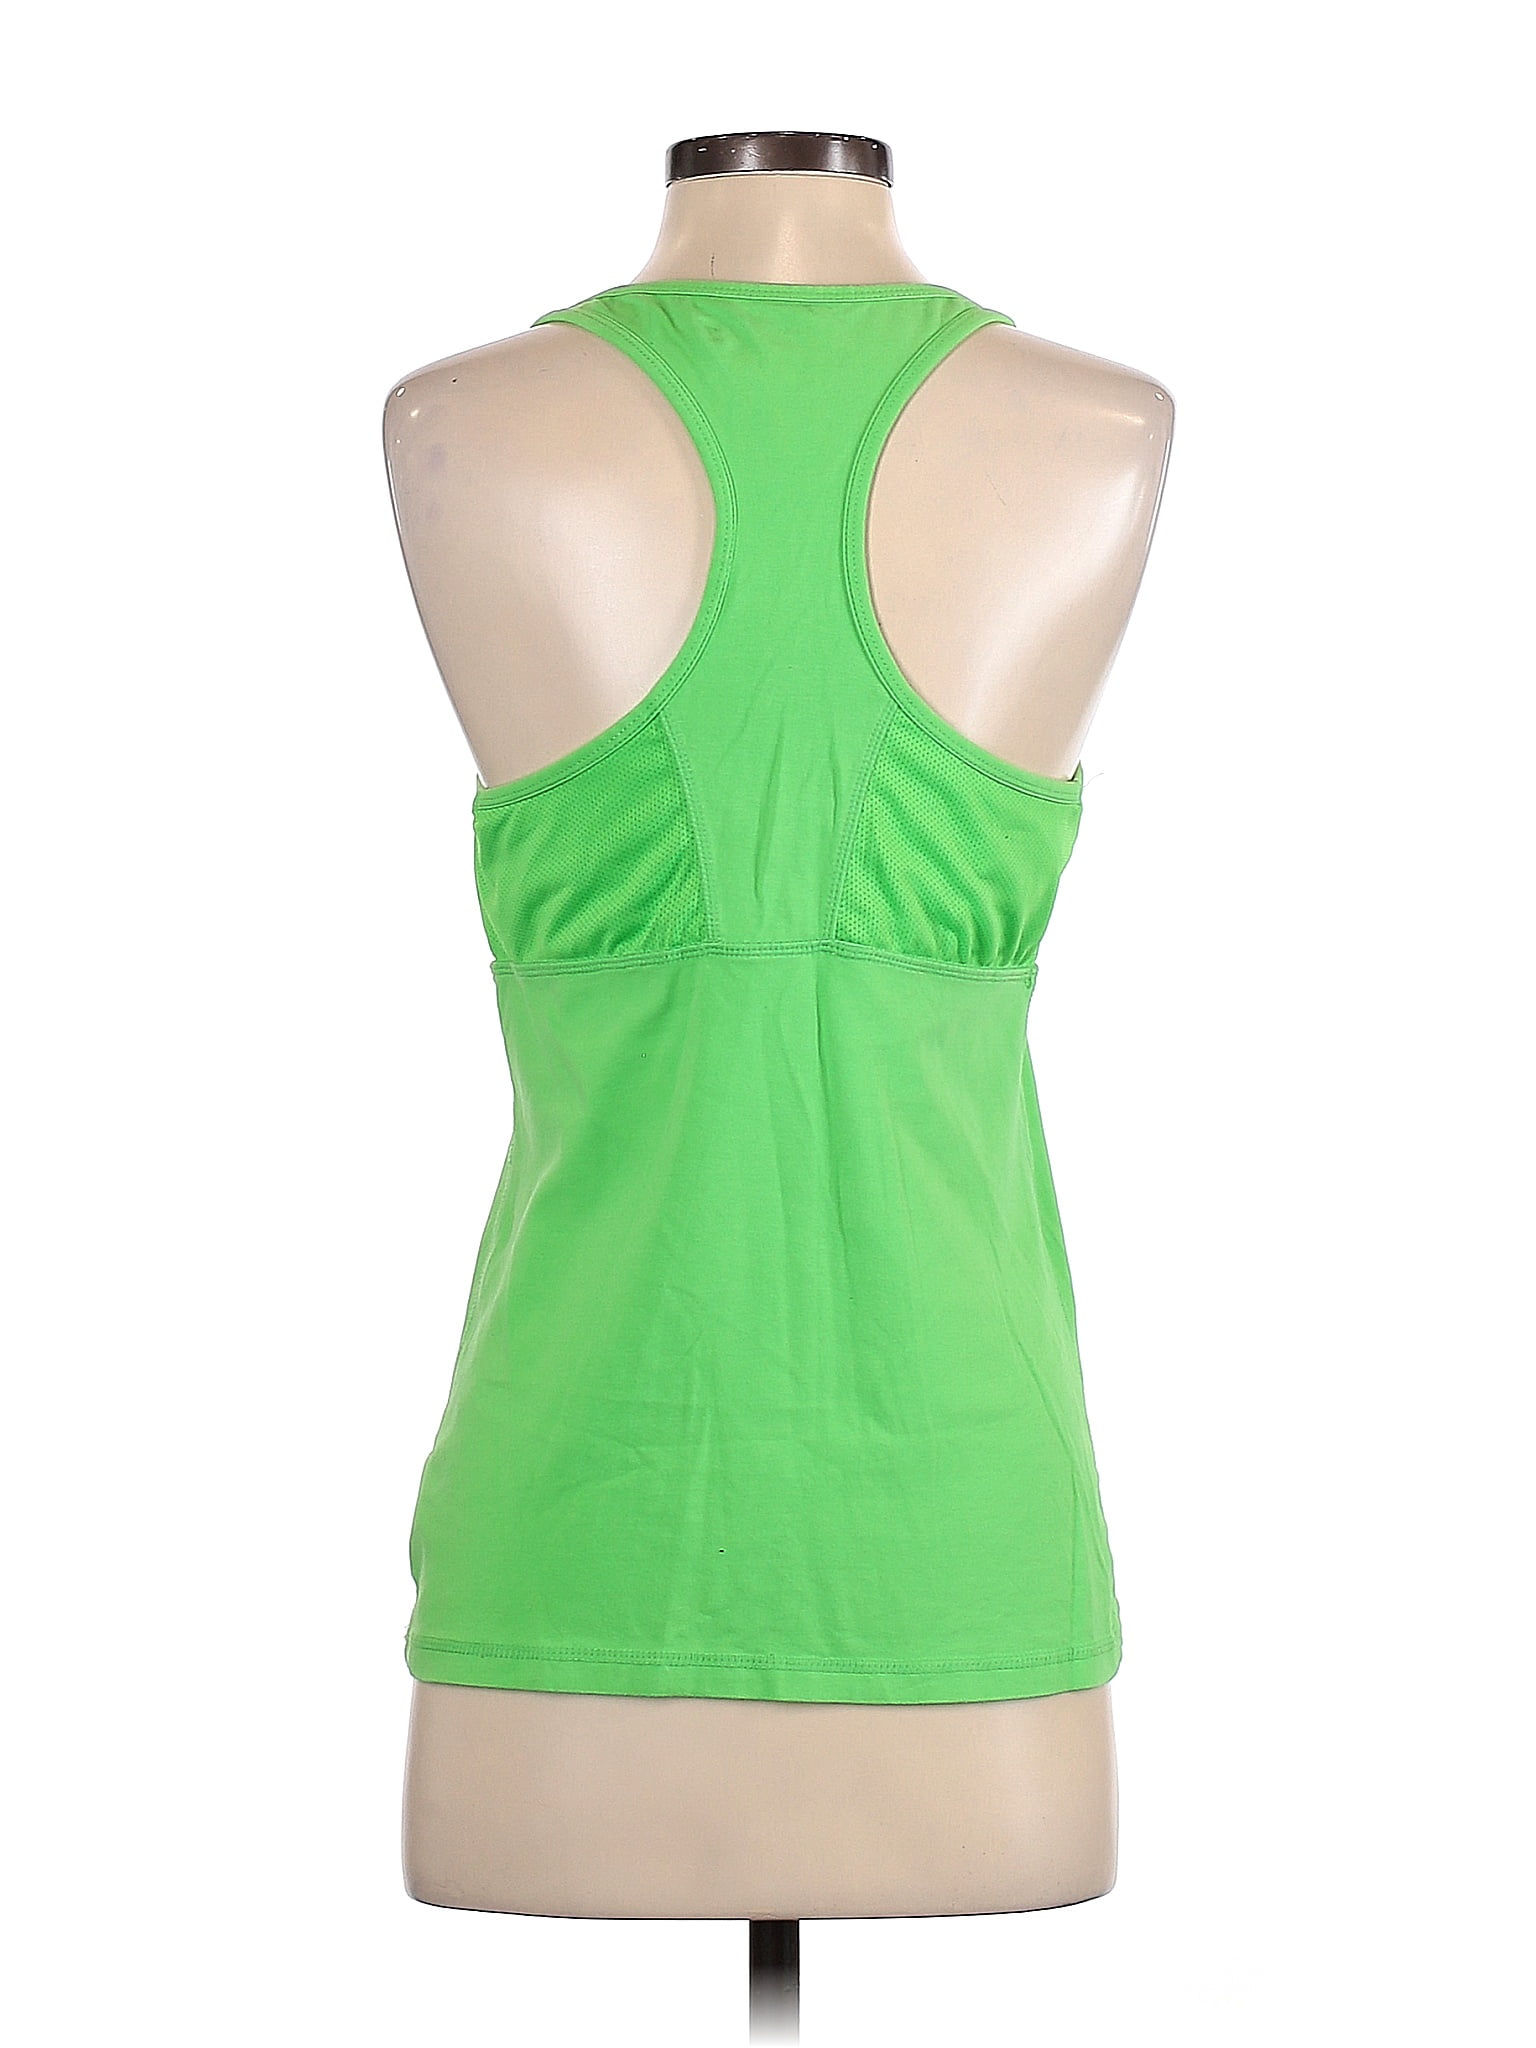 C9 By Champion Green Sports Bra Size S - 44% off